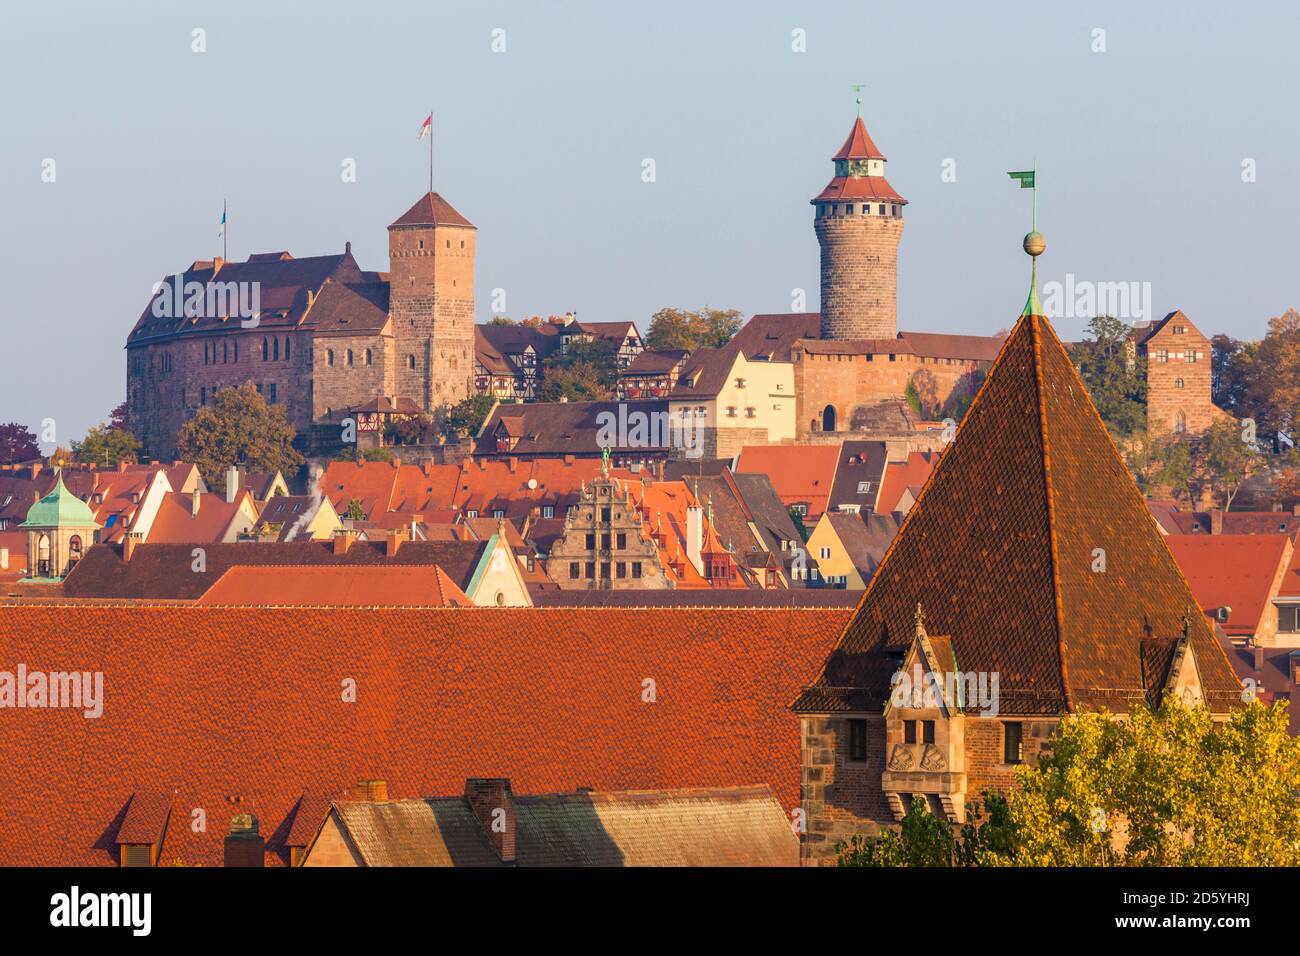 Germany, Bavaria, Nuremberg, Old town, cityscape with Nuremberg Castle and Debtor's prison right Stock Photo